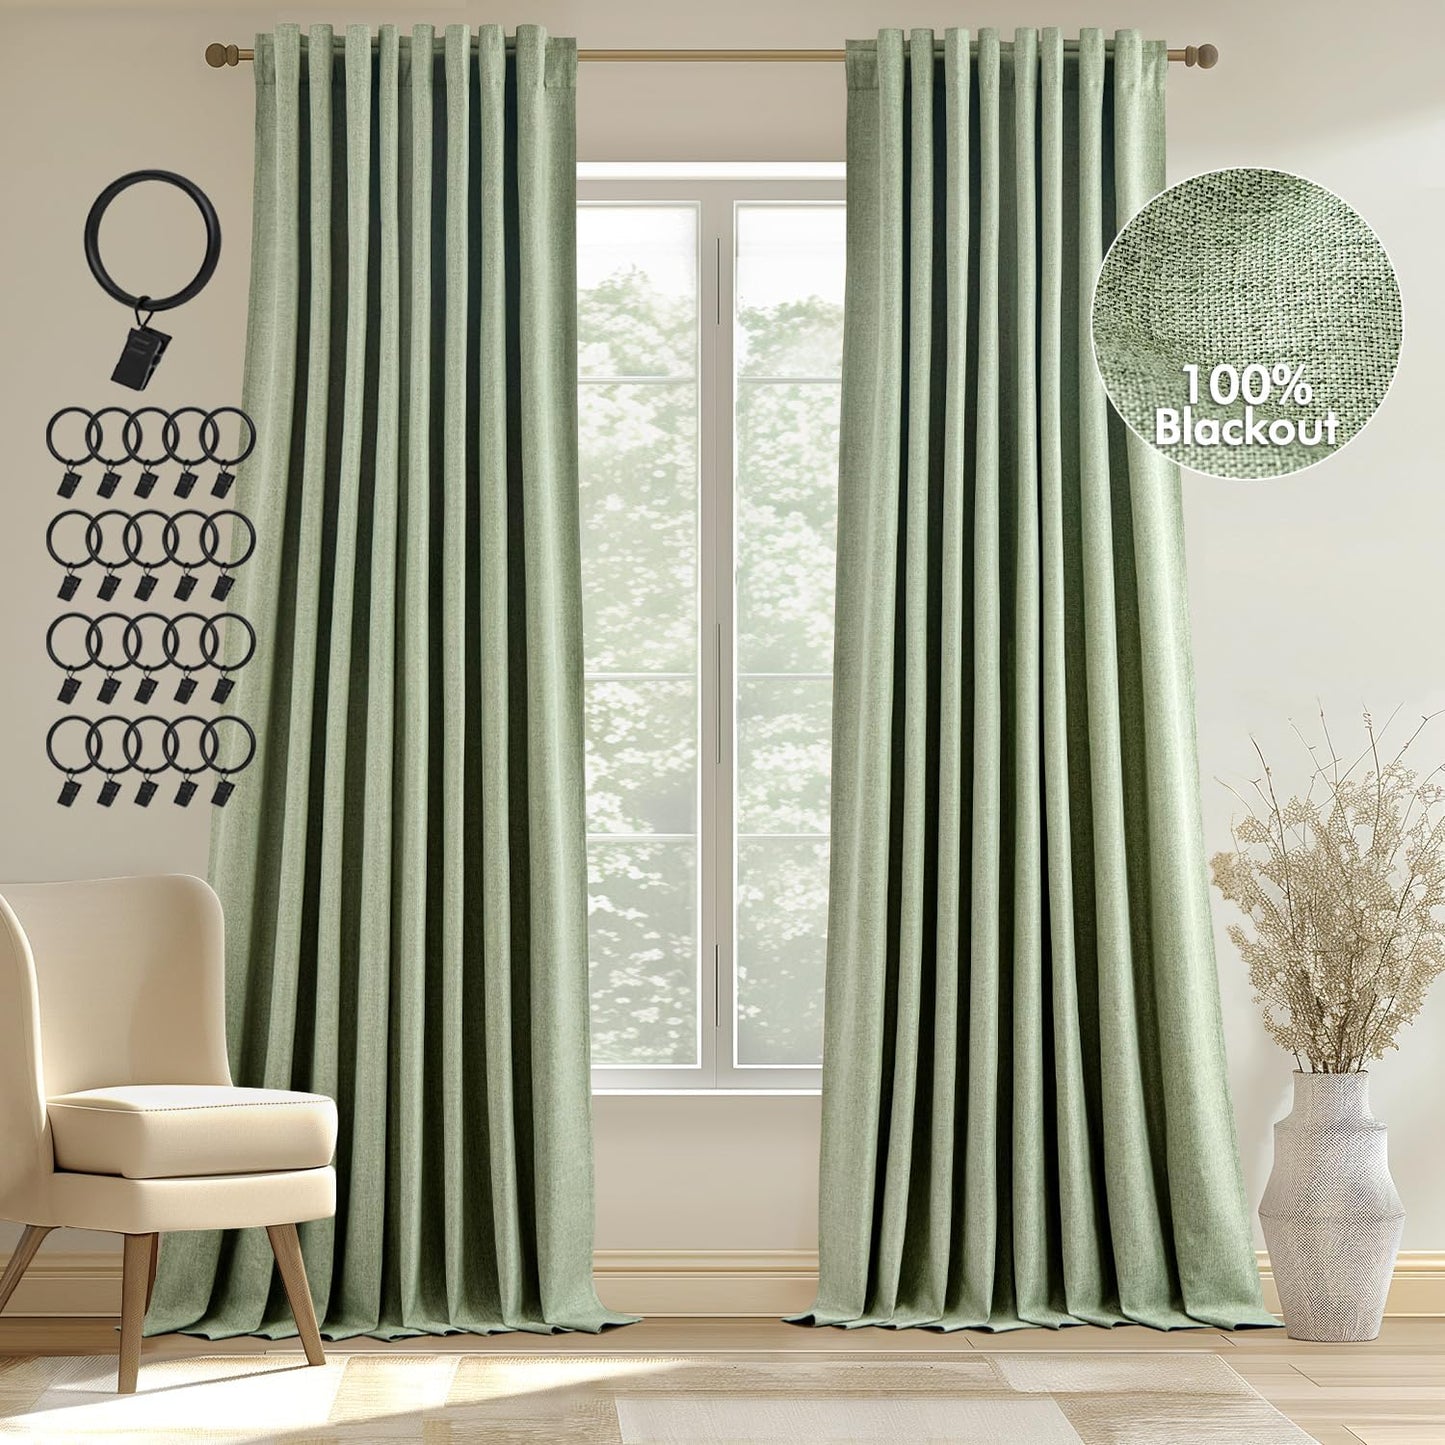 MIULEE 100% Blackout Curtains 90 Inches Long, Linen Curtains & Drapes for Bedroom Back Tab Black Out Window Treatments Thermal Insulated Room Darkening Rod Pocket, Oatmeal, 2 Panels  MIULEE Sage Green 52"W*90"L 